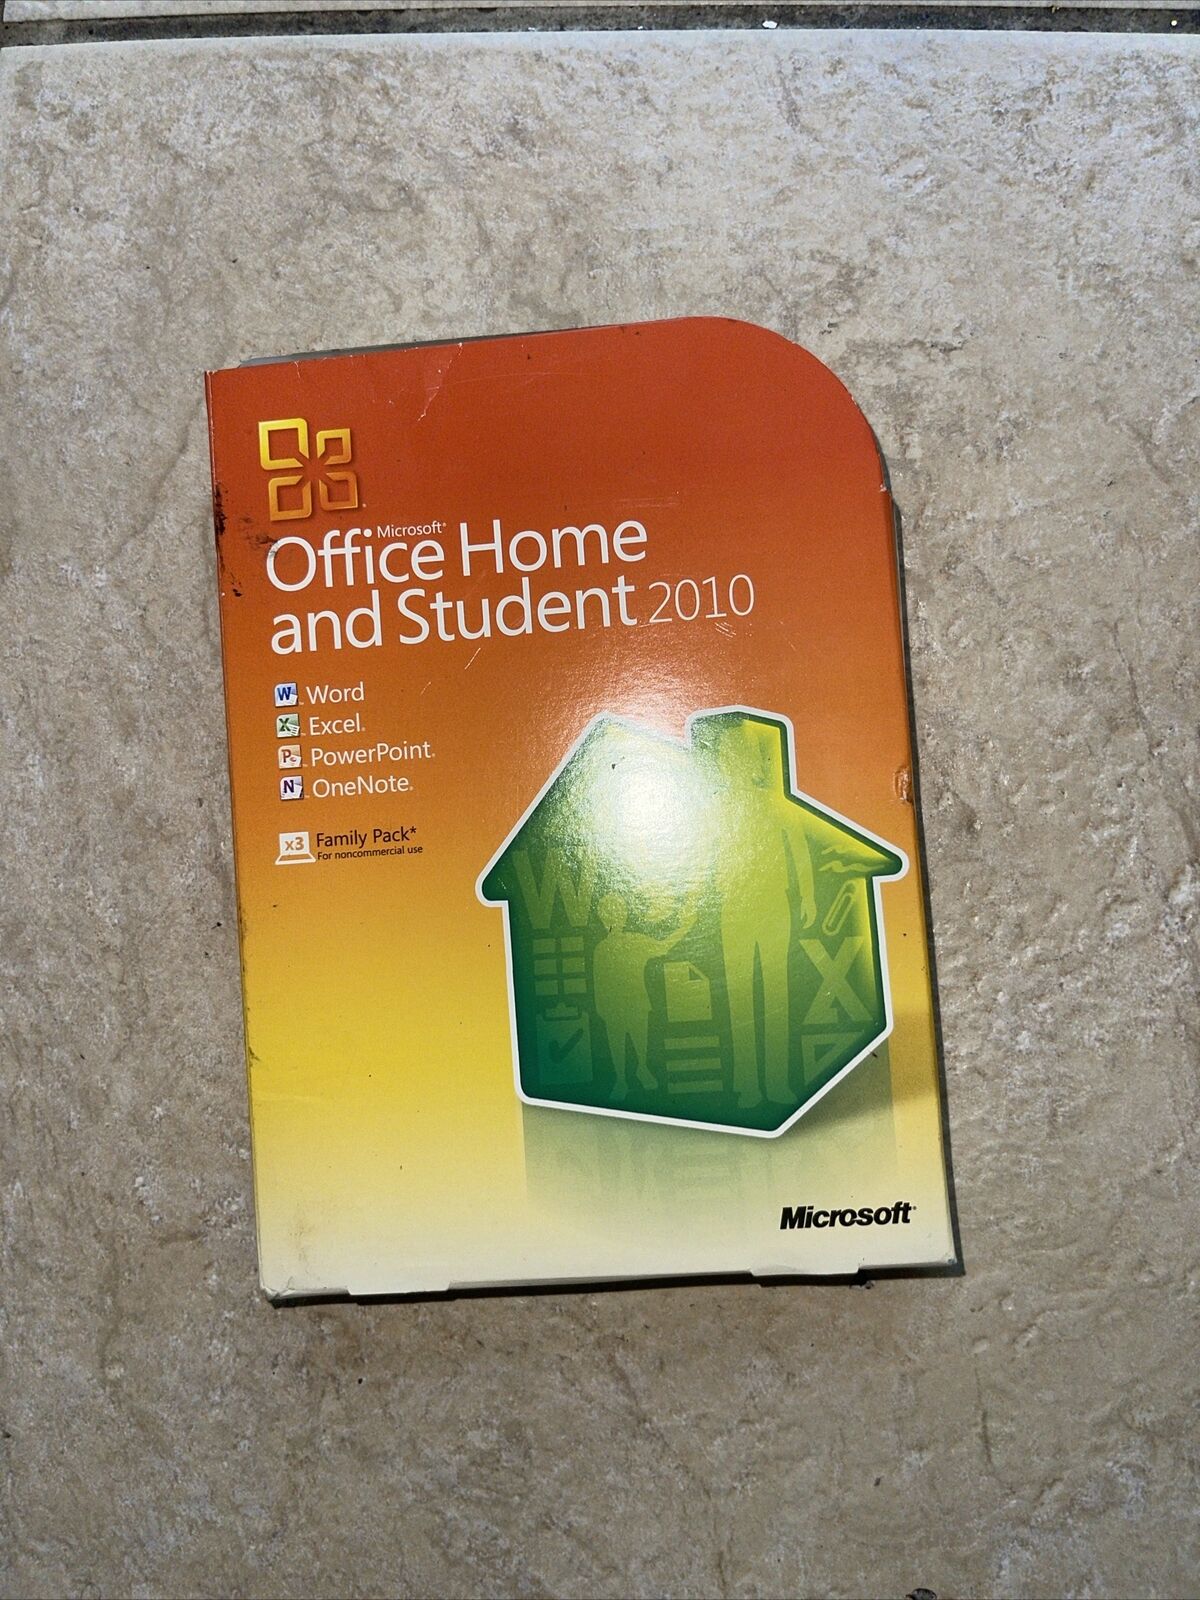 Microsoft Office Home and Student 2010 Software 3 Family Pack Windows w/ Key